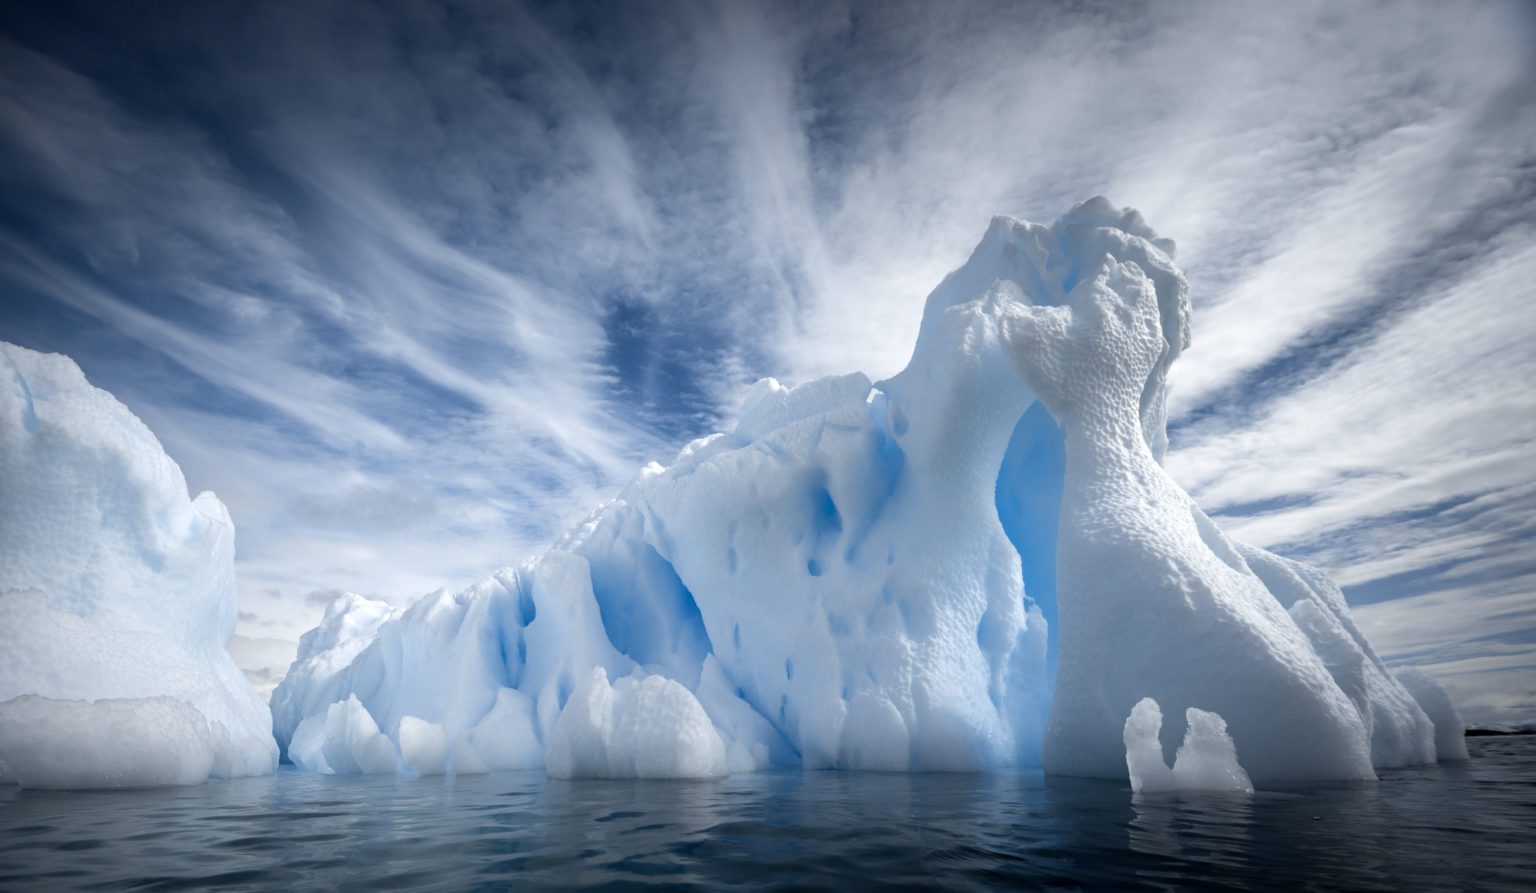 artistically carved aquamarine iceberg with white clouds above in Antarctica